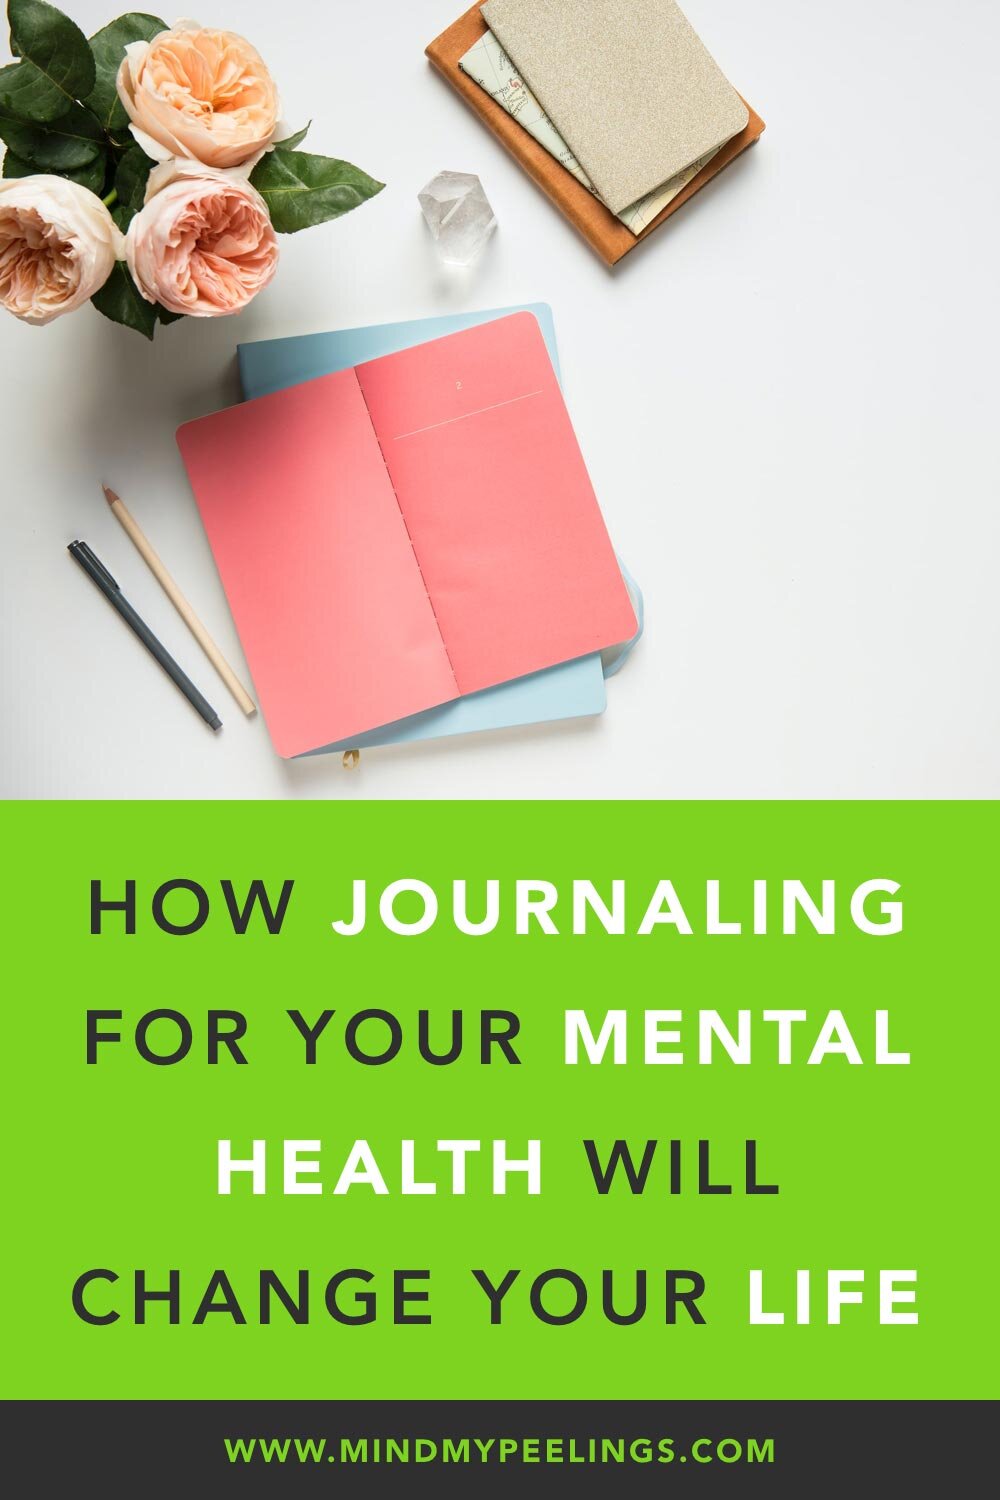 Start your journal journey & enjoy the benefits of expressive writing.